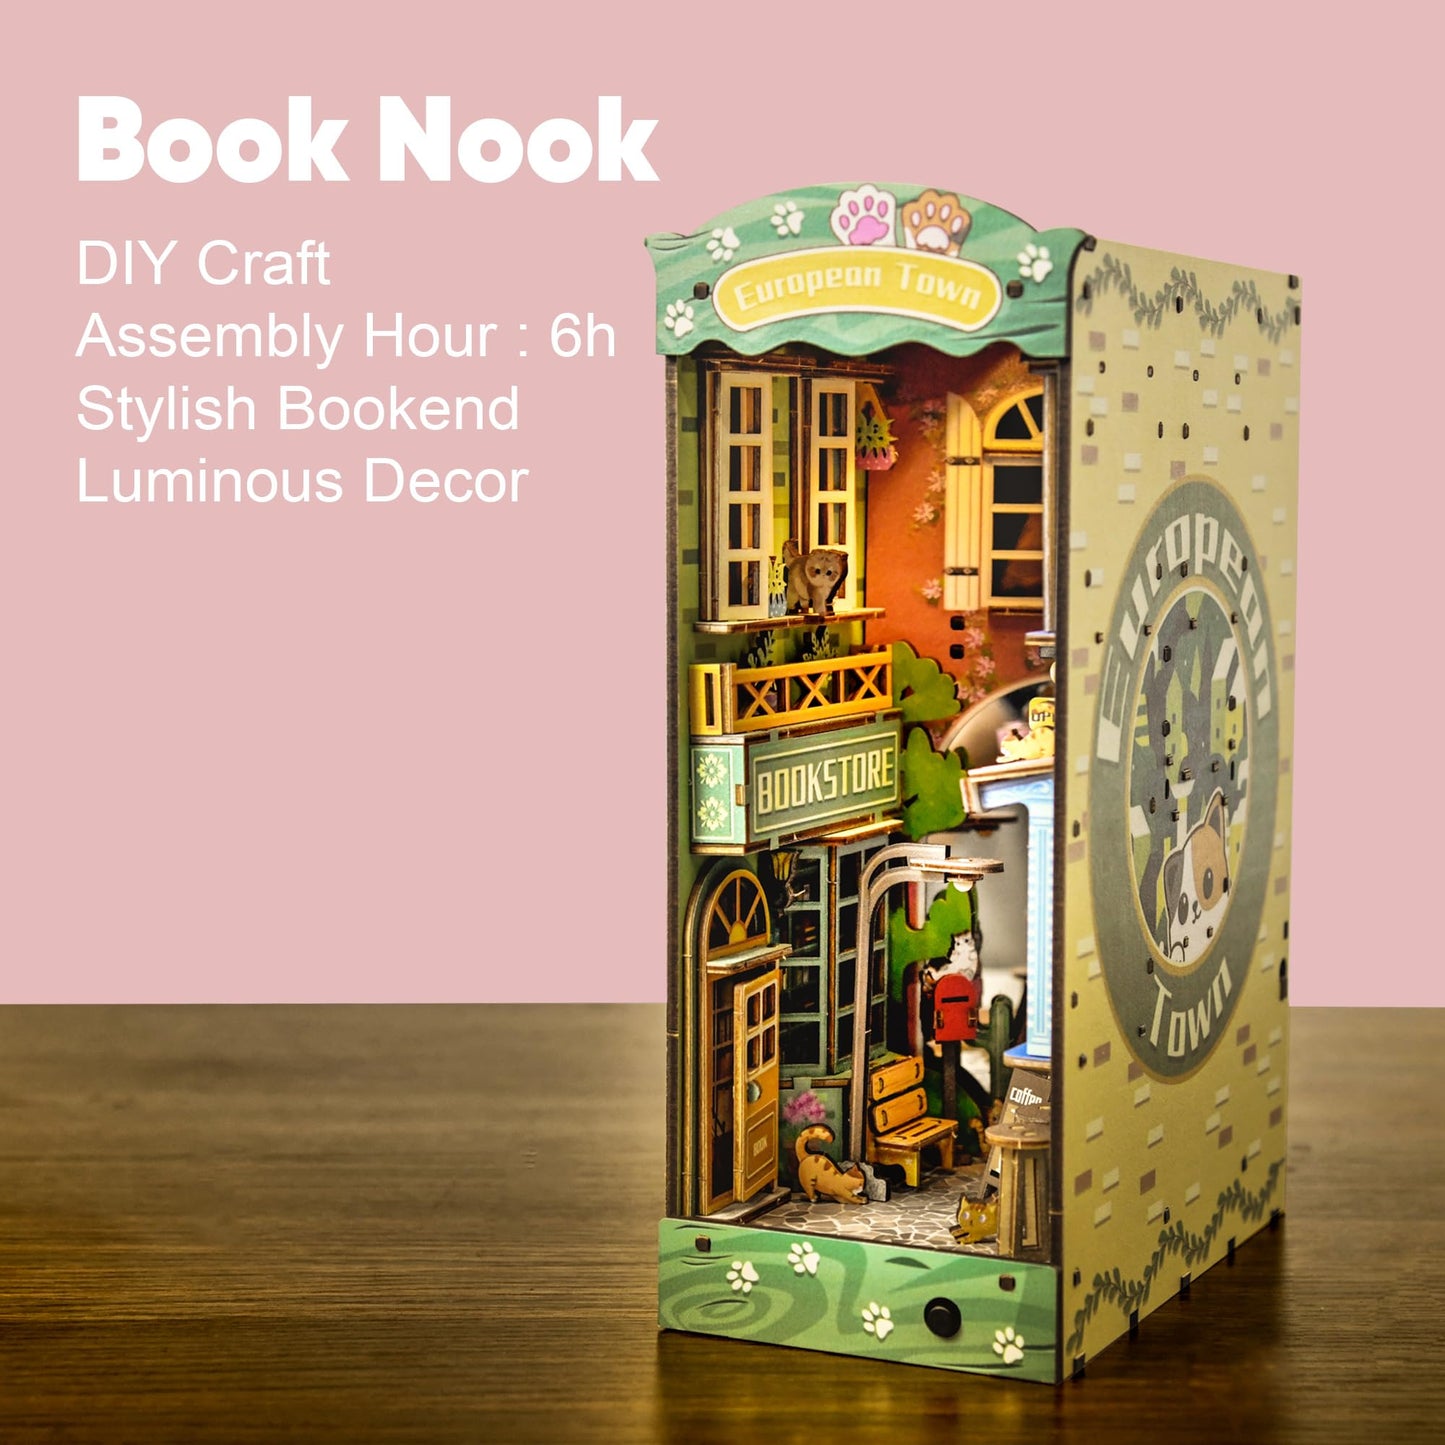 DIY Book Nook Kit 3D Wooden Puzzle, DIY BookNook Bookshelf Insert Decor with LED Model Building Kits, Bookend Diorama Miniature Kit Gifts for